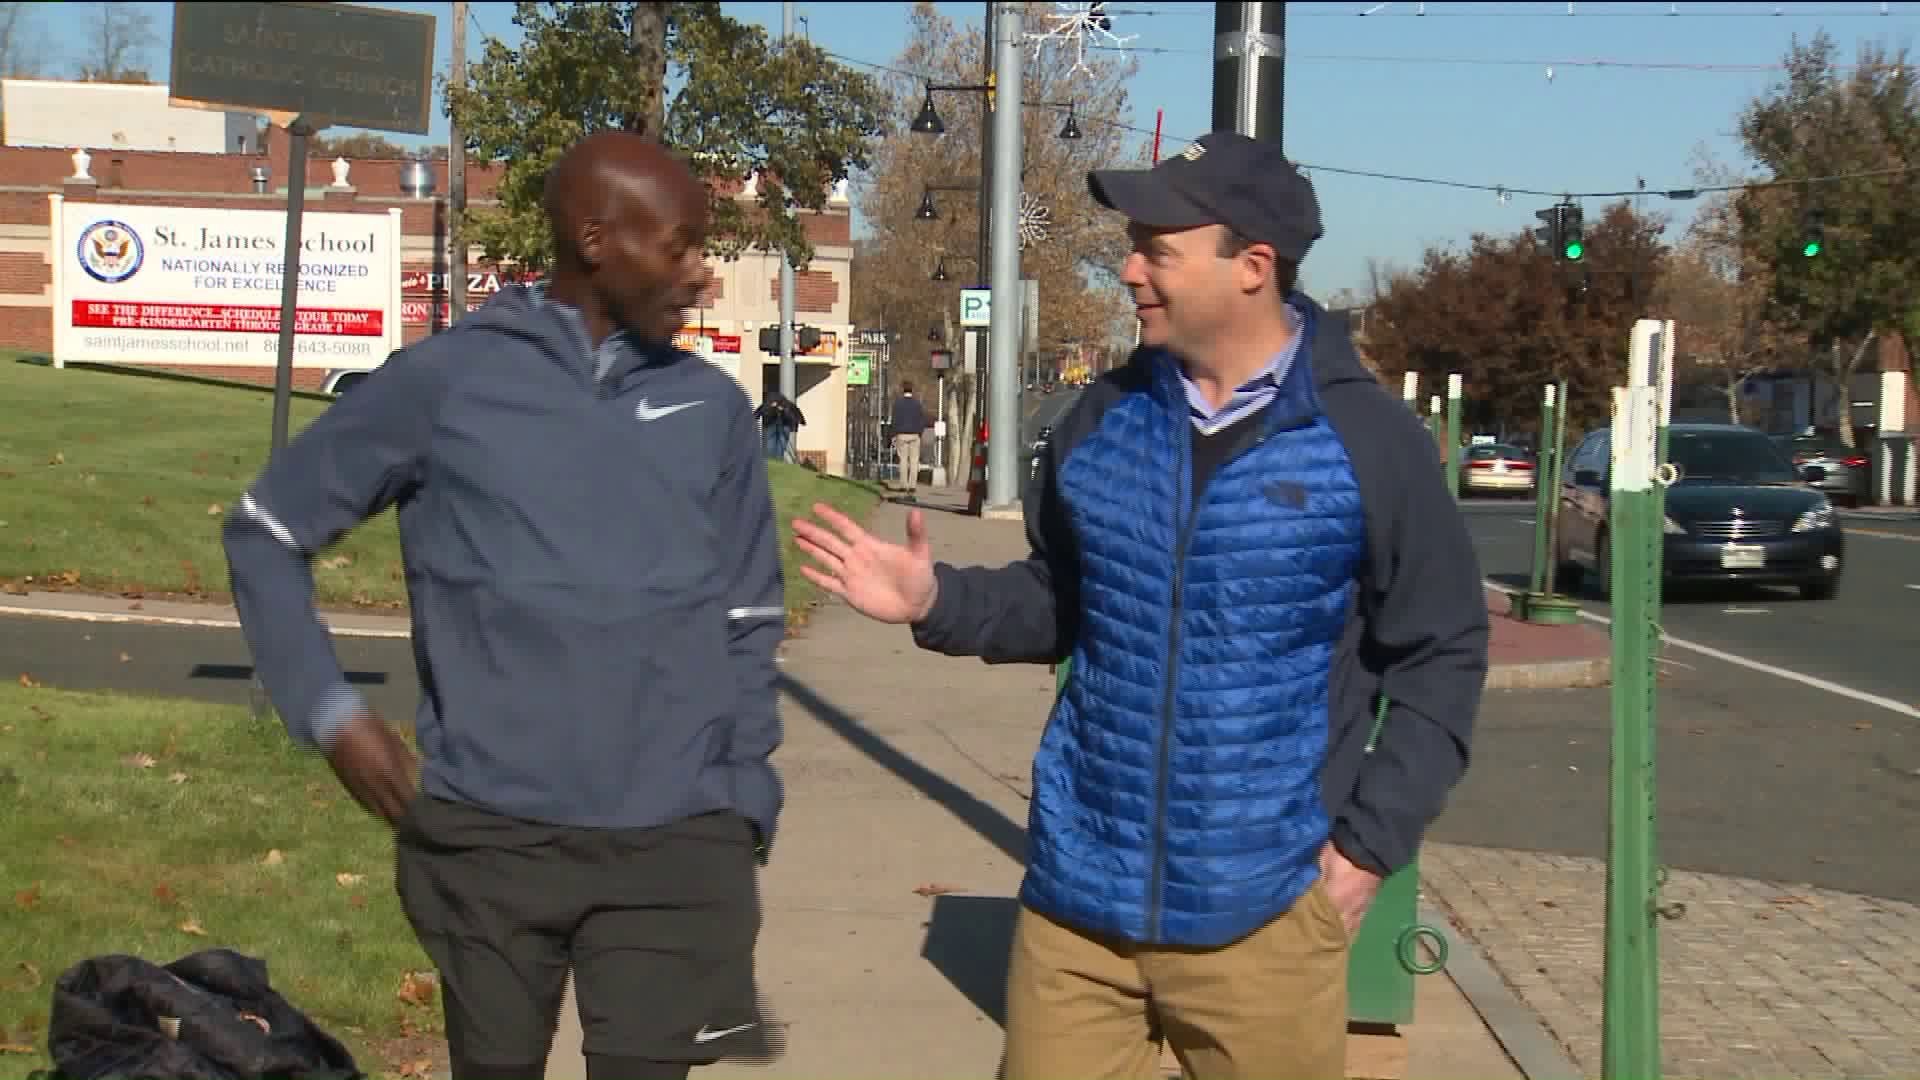 A new face in the race, Lagat brings the running resume